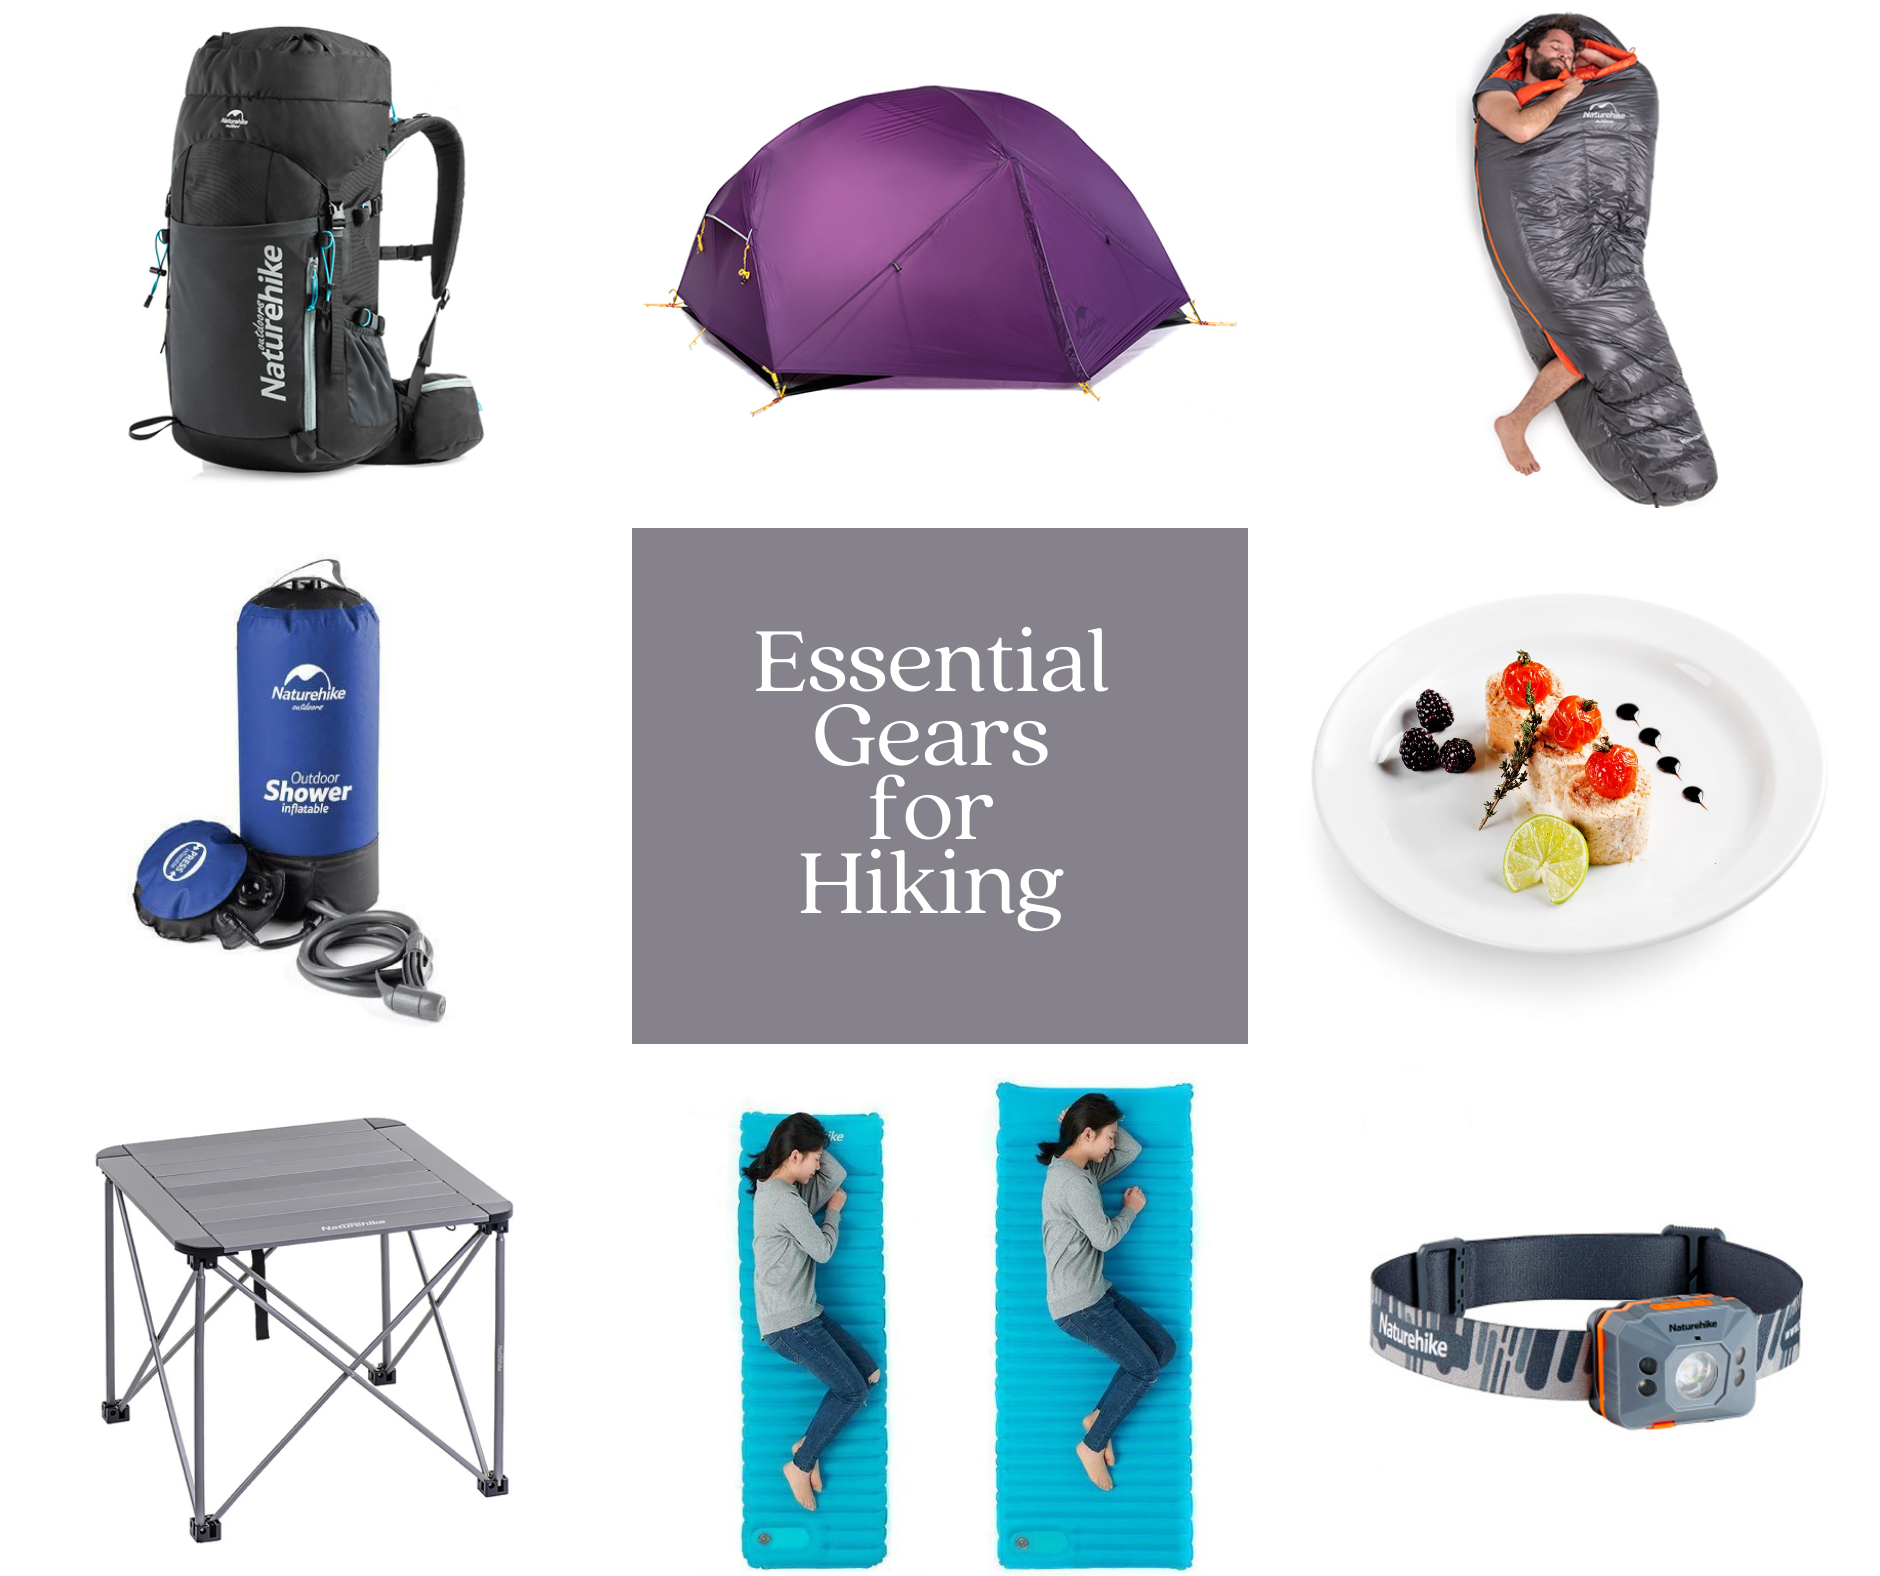 How to Find the Perfect Camping Gear